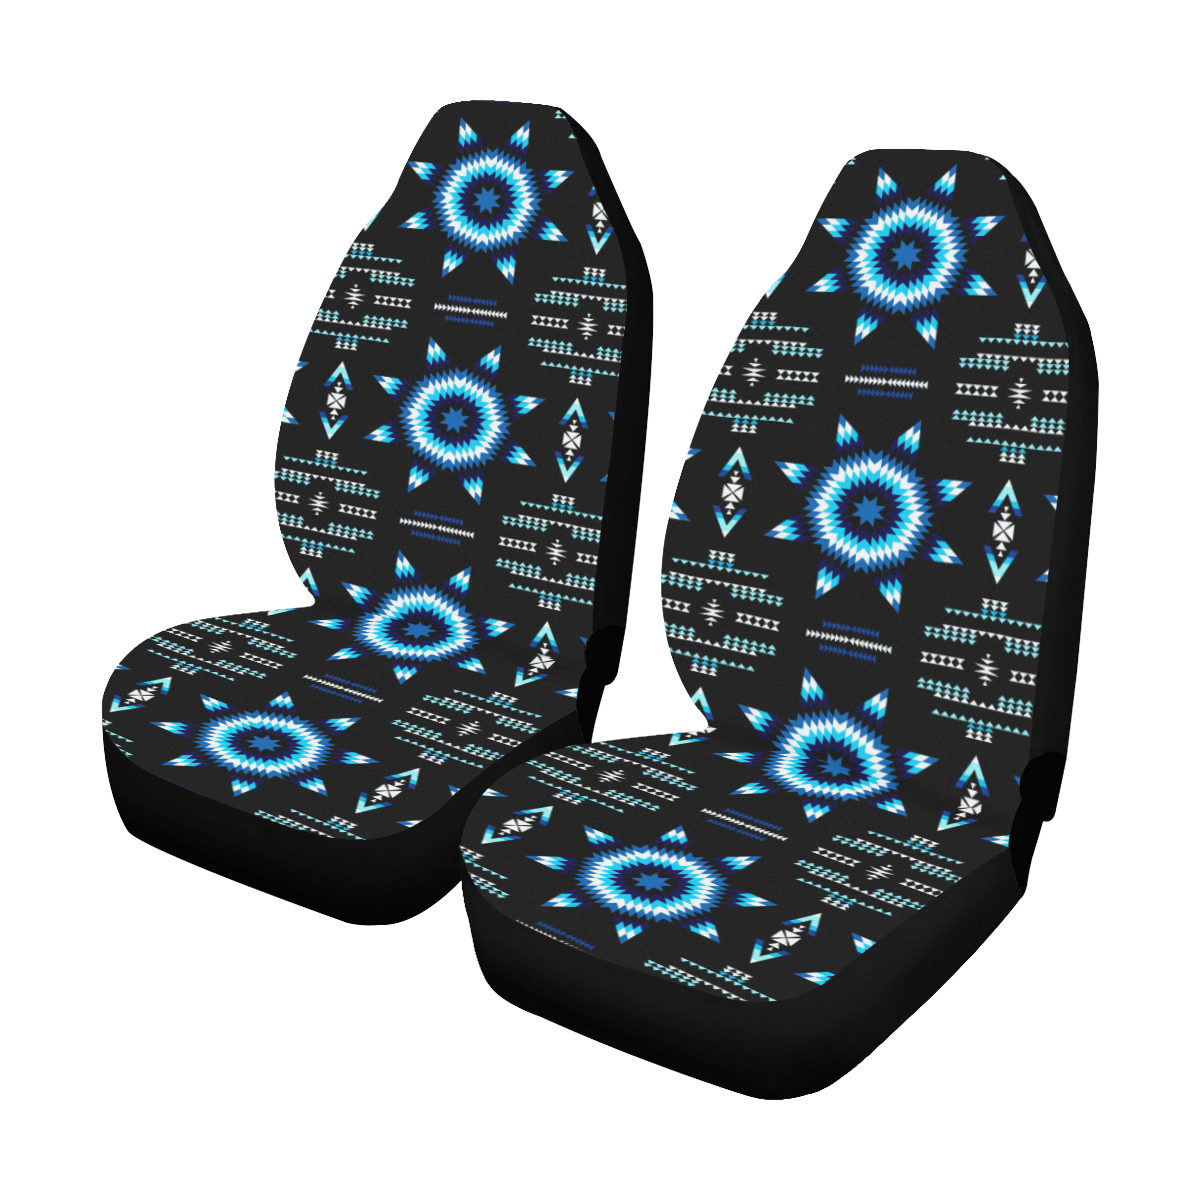 Rising Star Wolf Moon Seat Covers (Set of 2)